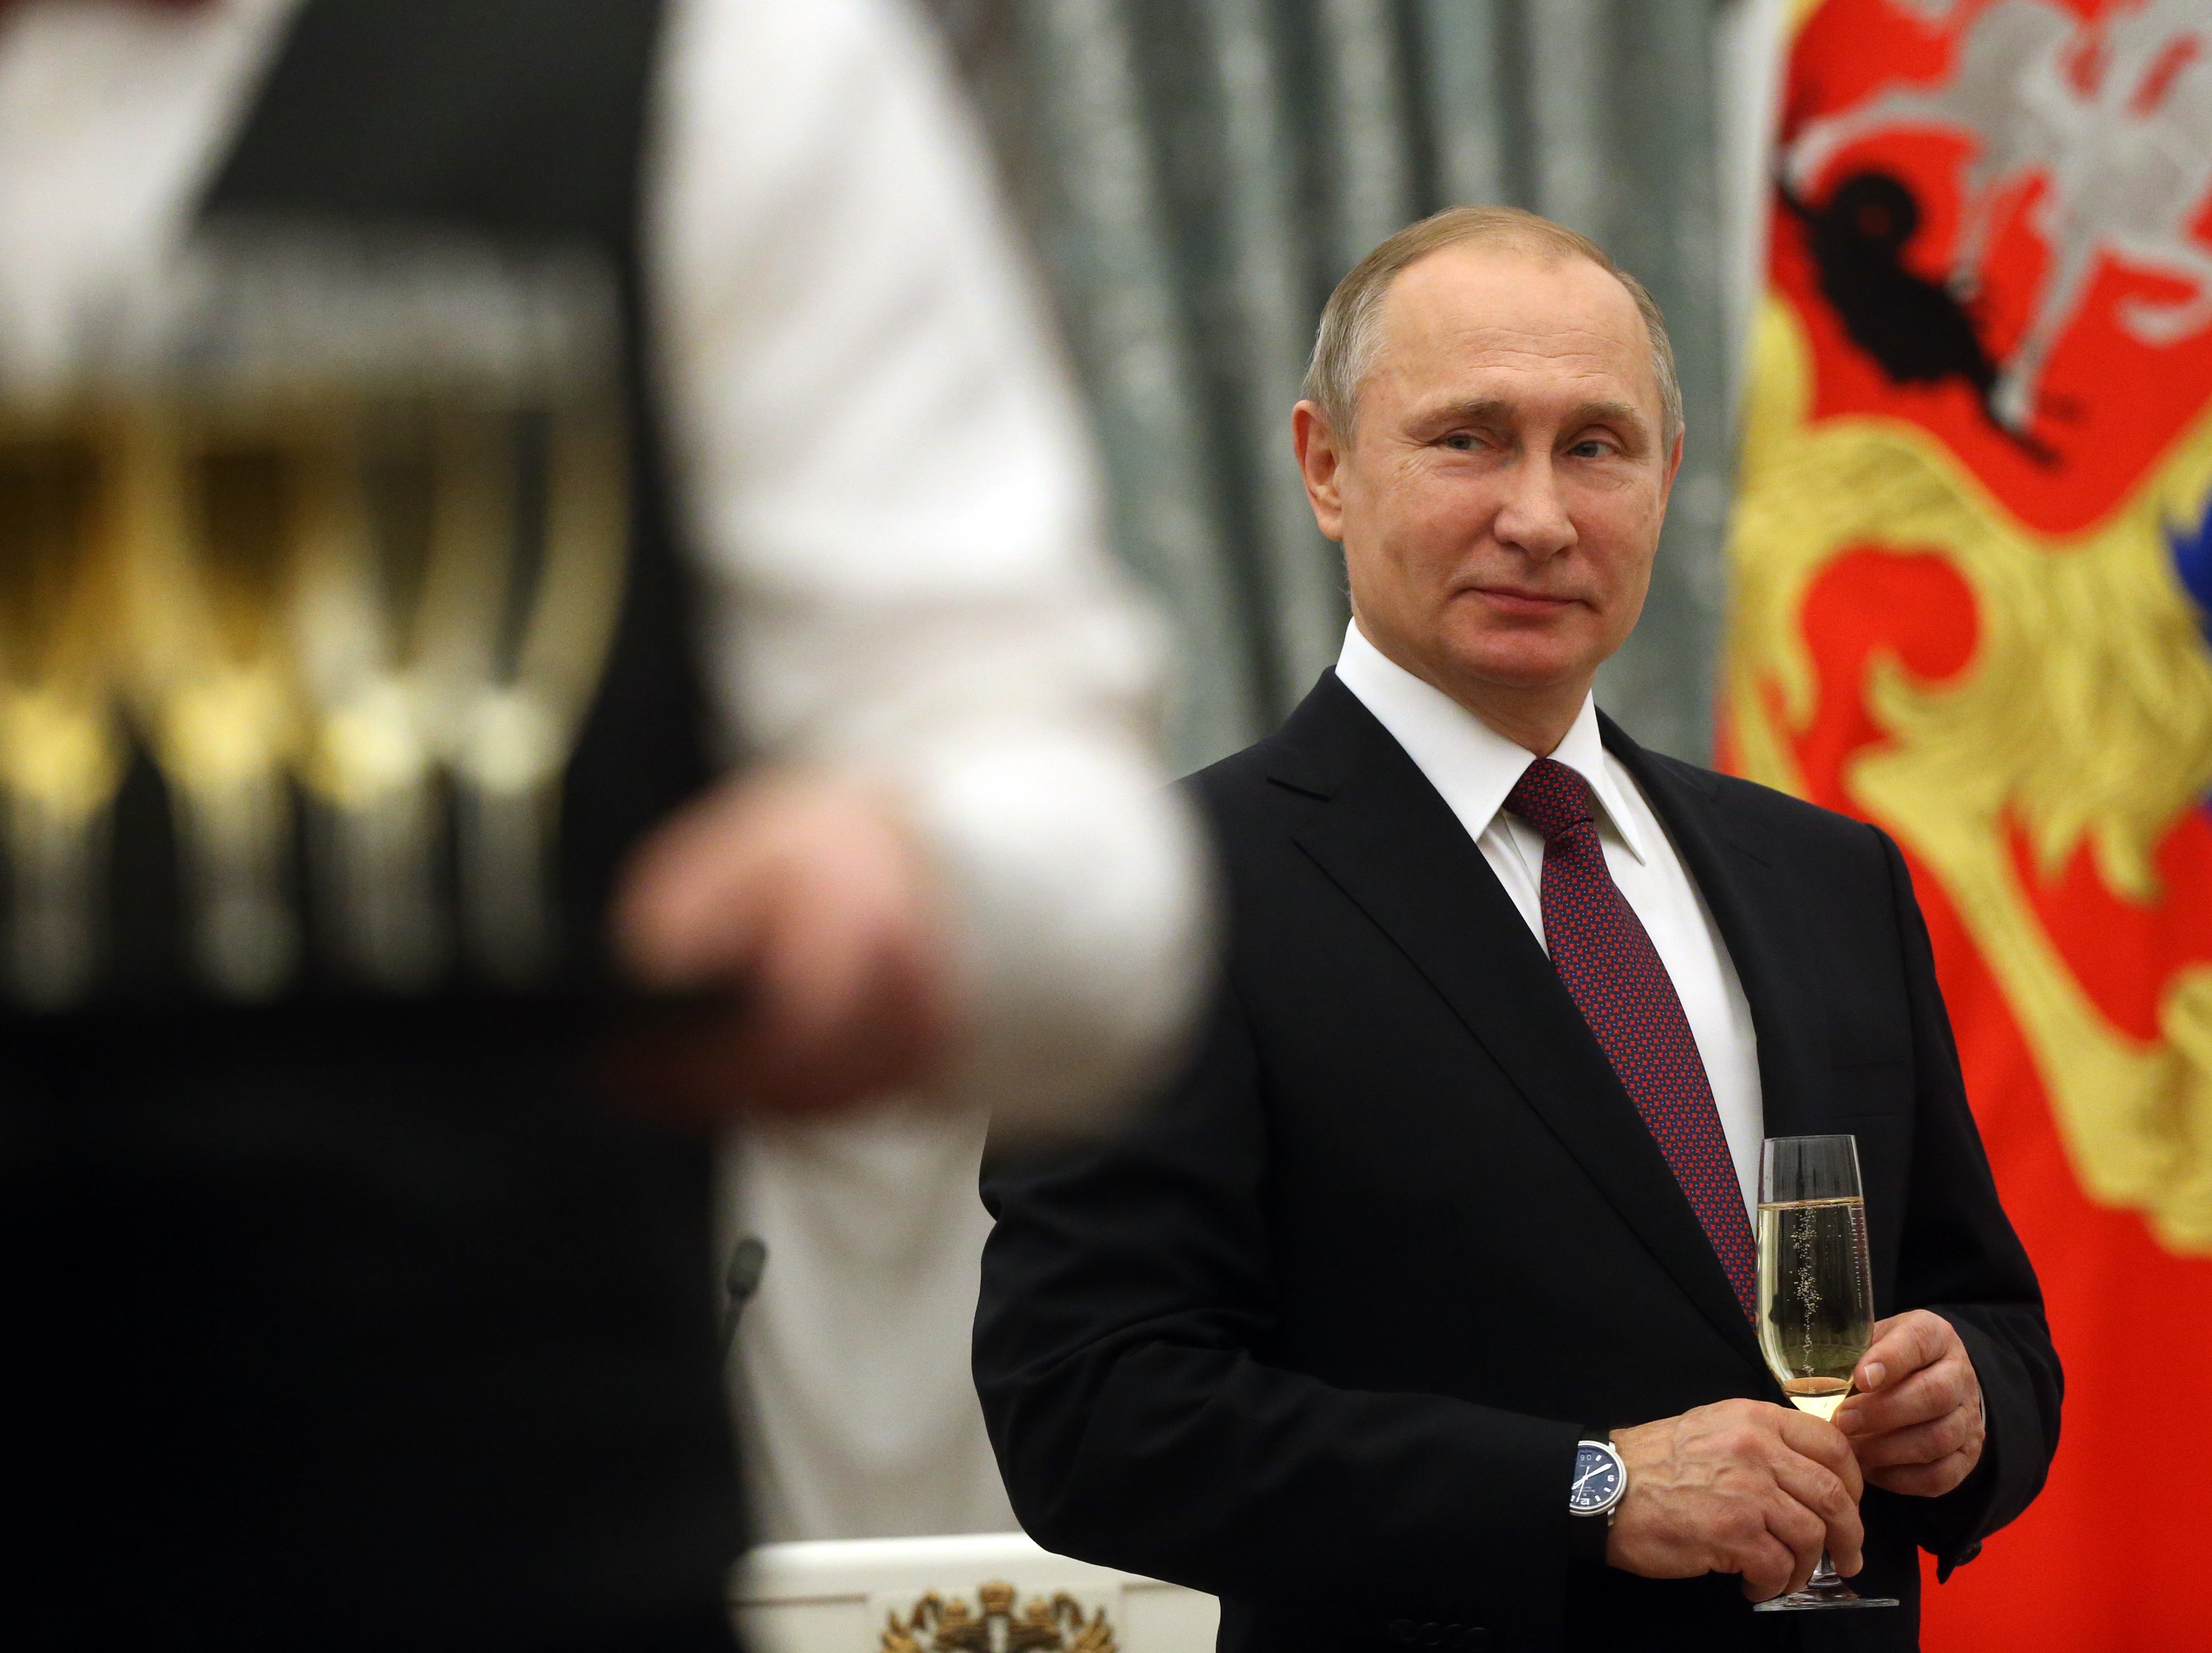 RUSSIA, MOSCOW - DECEMBER 8: (RUSSIA OUT) Russian President Vladimir Putin holds a glass of champagne during the awarding ceremony for Human Rights and Civil Society activists at the Grand Kremlin Palace on December, 8, 2016 in Moscow, Russia. (Photo by Mikhail Svetlov/Getty Images)